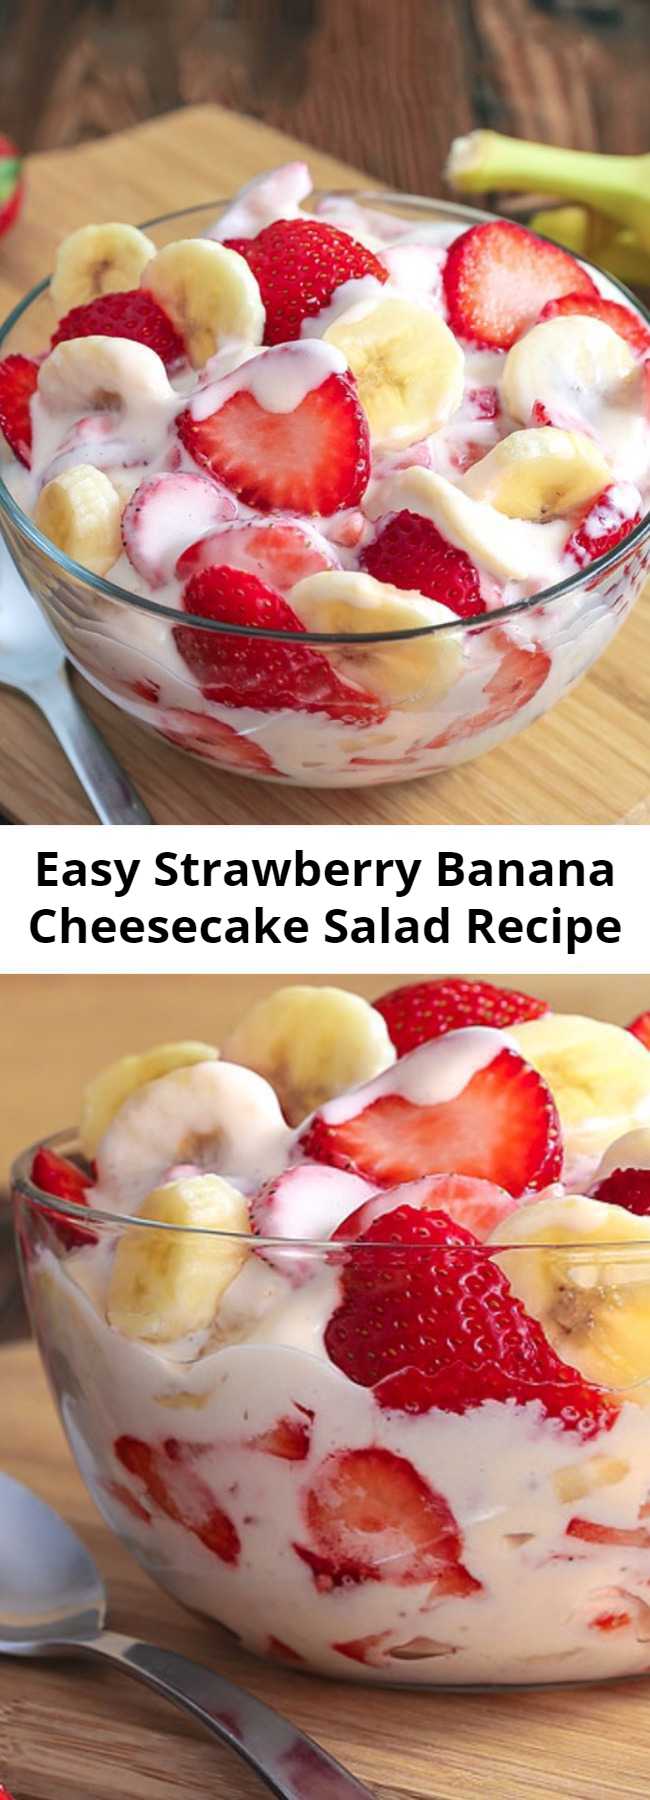 Simple Strawberry Banana Cheesecake Salad Recipe - Simple Strawberry Banana Cheesecake Salad recipe comes together with just 6 ingredients. Rich and creamy cheesecake filling is folded into luscious strawberries and sweet banana to create the most amazing, glorious fruit salad ever! #strawberries #potluckfood